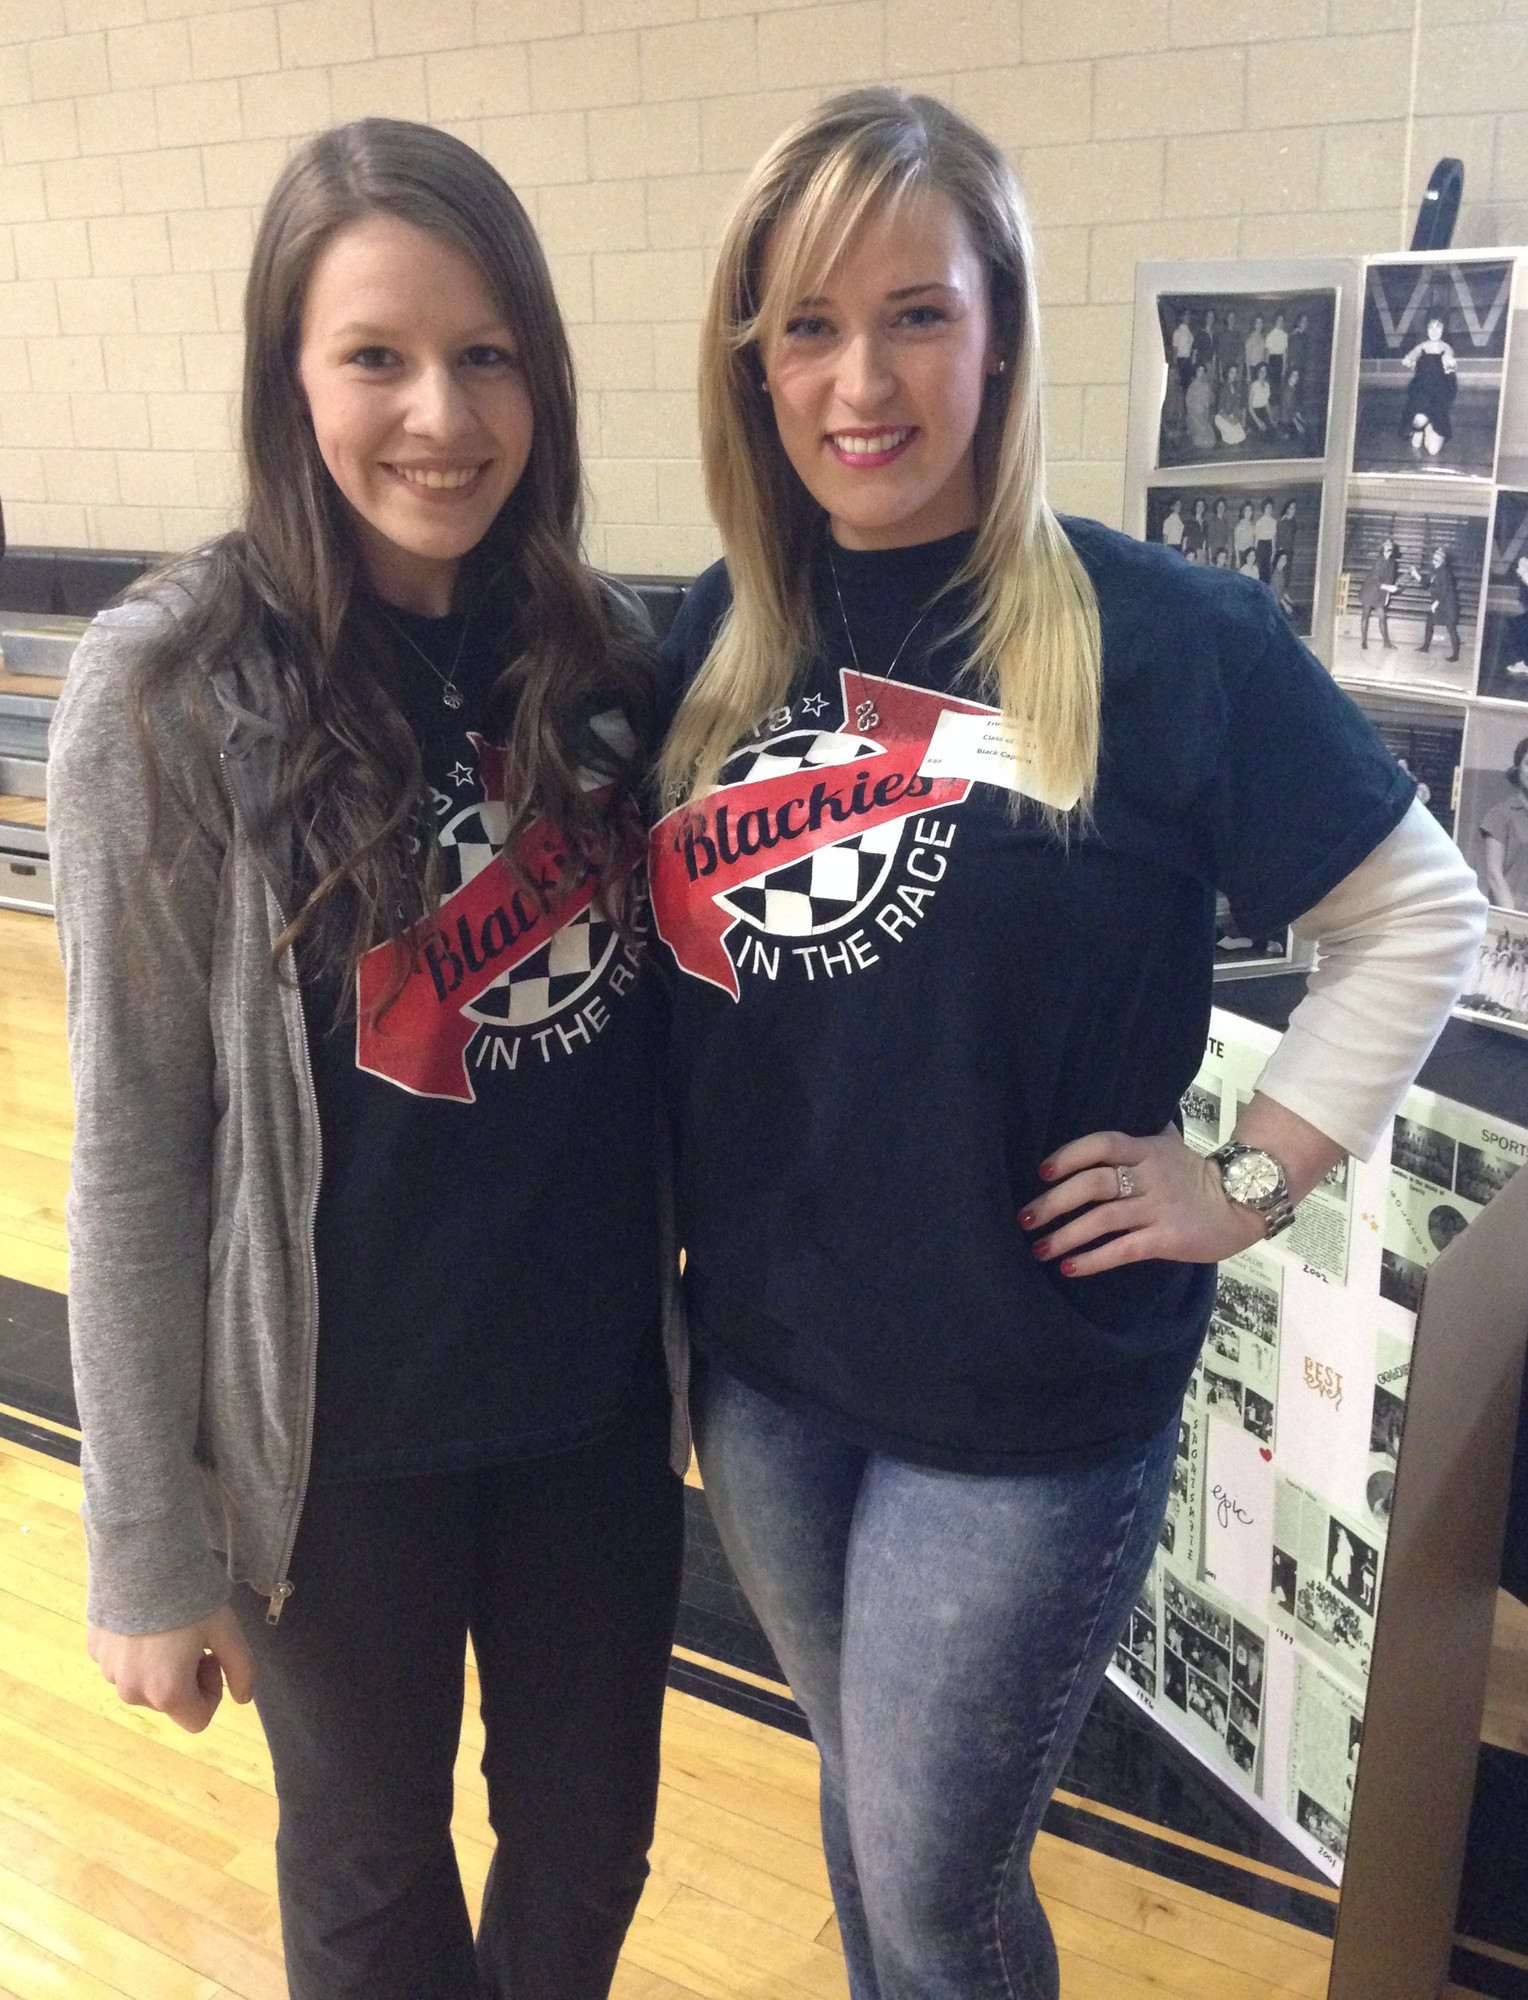 Grace Hostetter and Erin Gallagher, who captained the Black team in 2013, stood near some of the old photos on display.